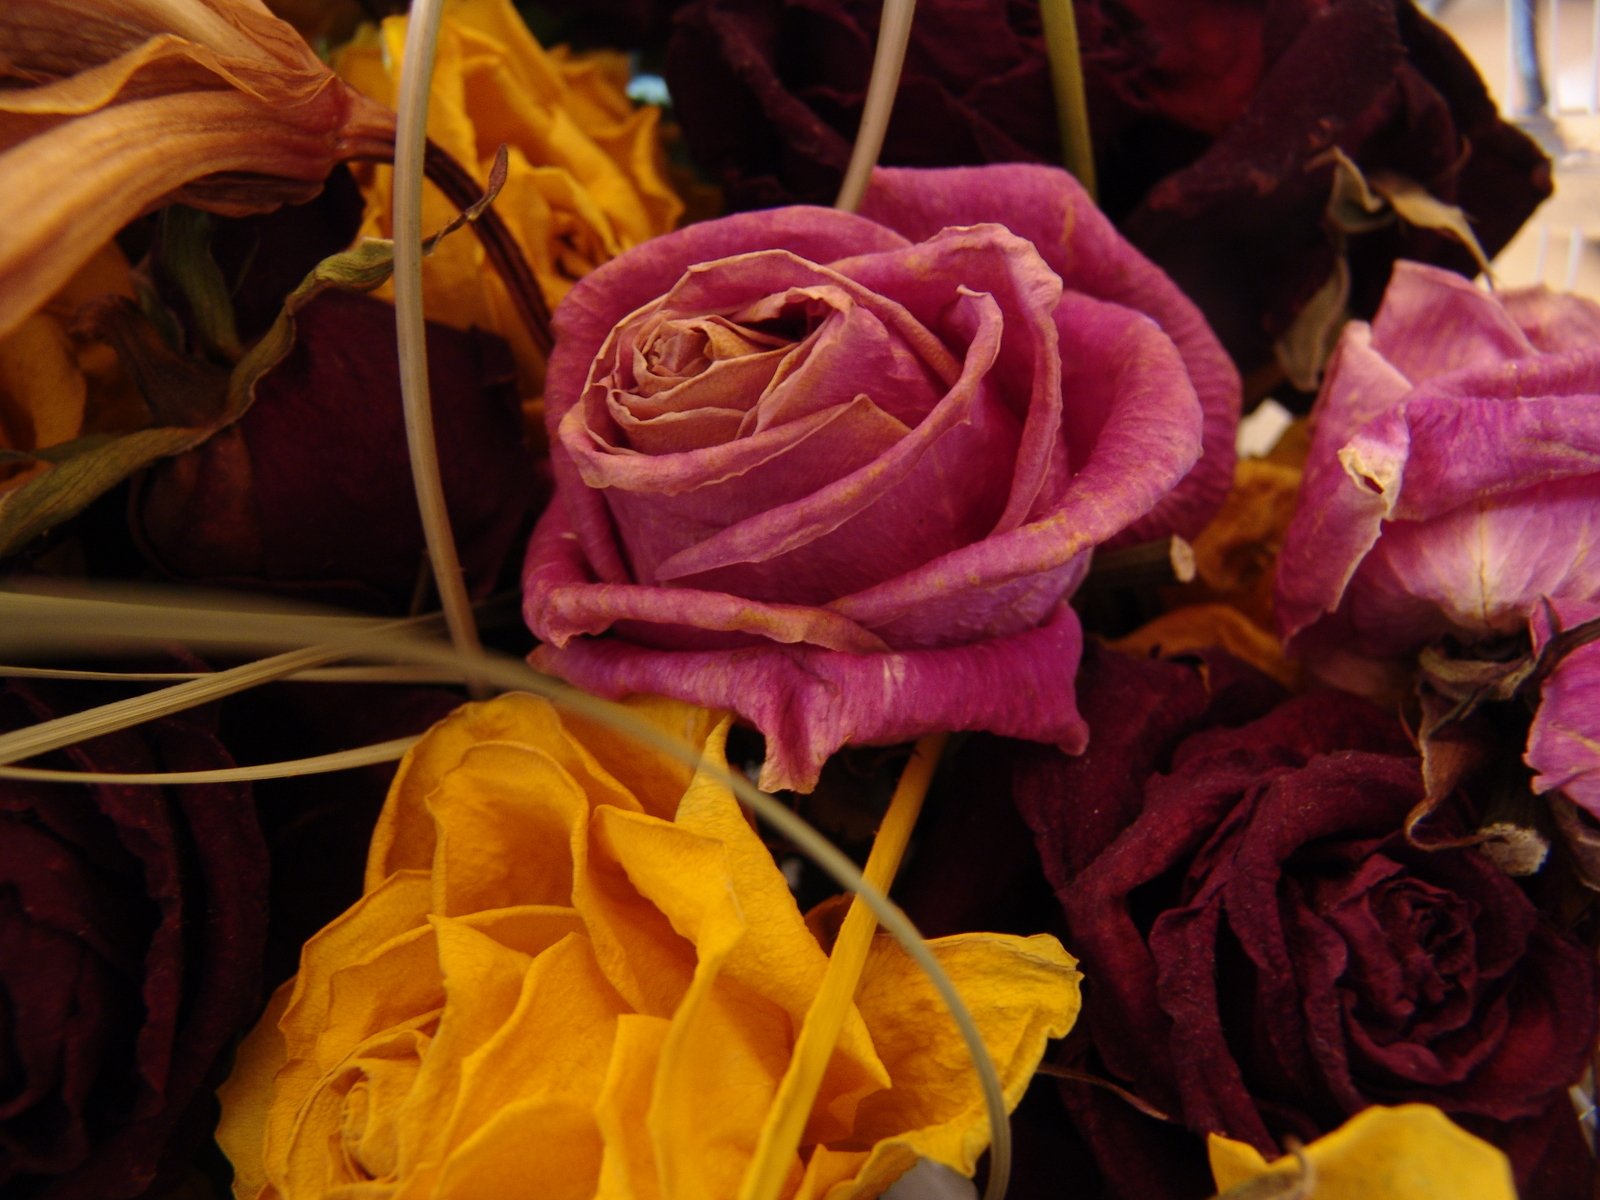 an arrangement of flower petals, such as pink, yellow and red, sits close to the camera